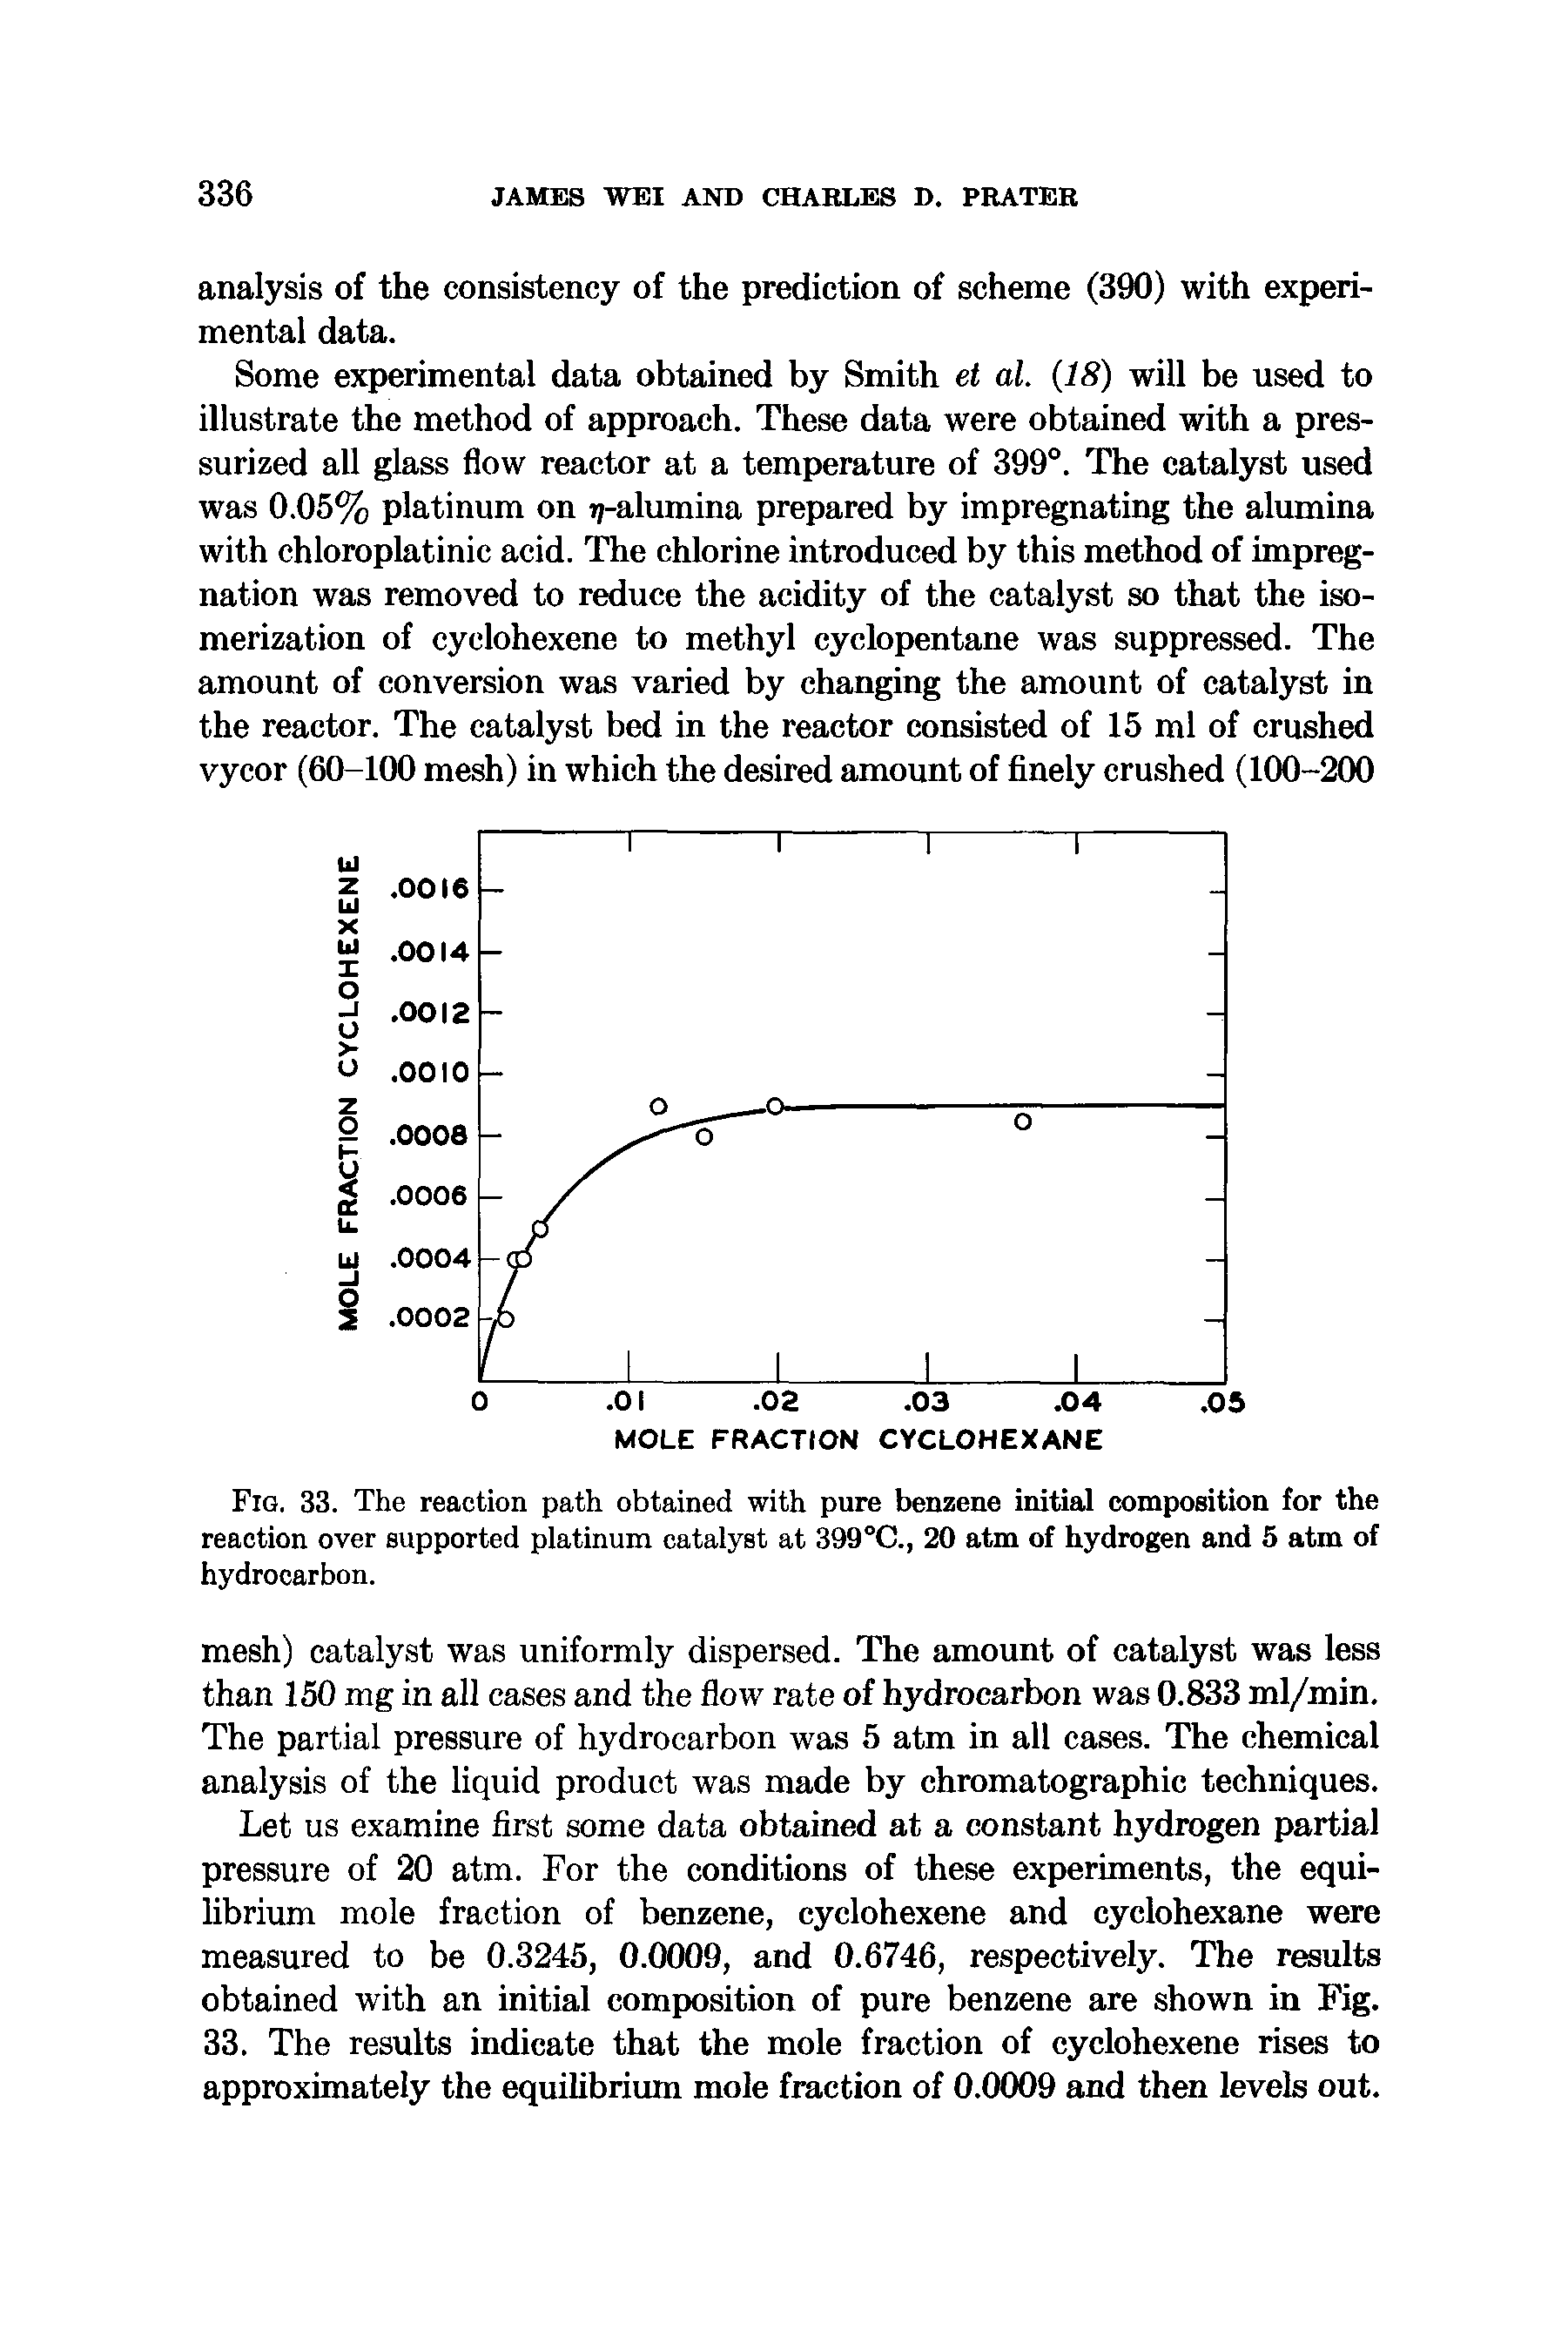 Fig. 33. The reaction path obtained with pure benzene initial composition for the reaction over supported platinum catalyst at 399°C., 20 atm of hydrogen and 5 atm of hydrocarbon.